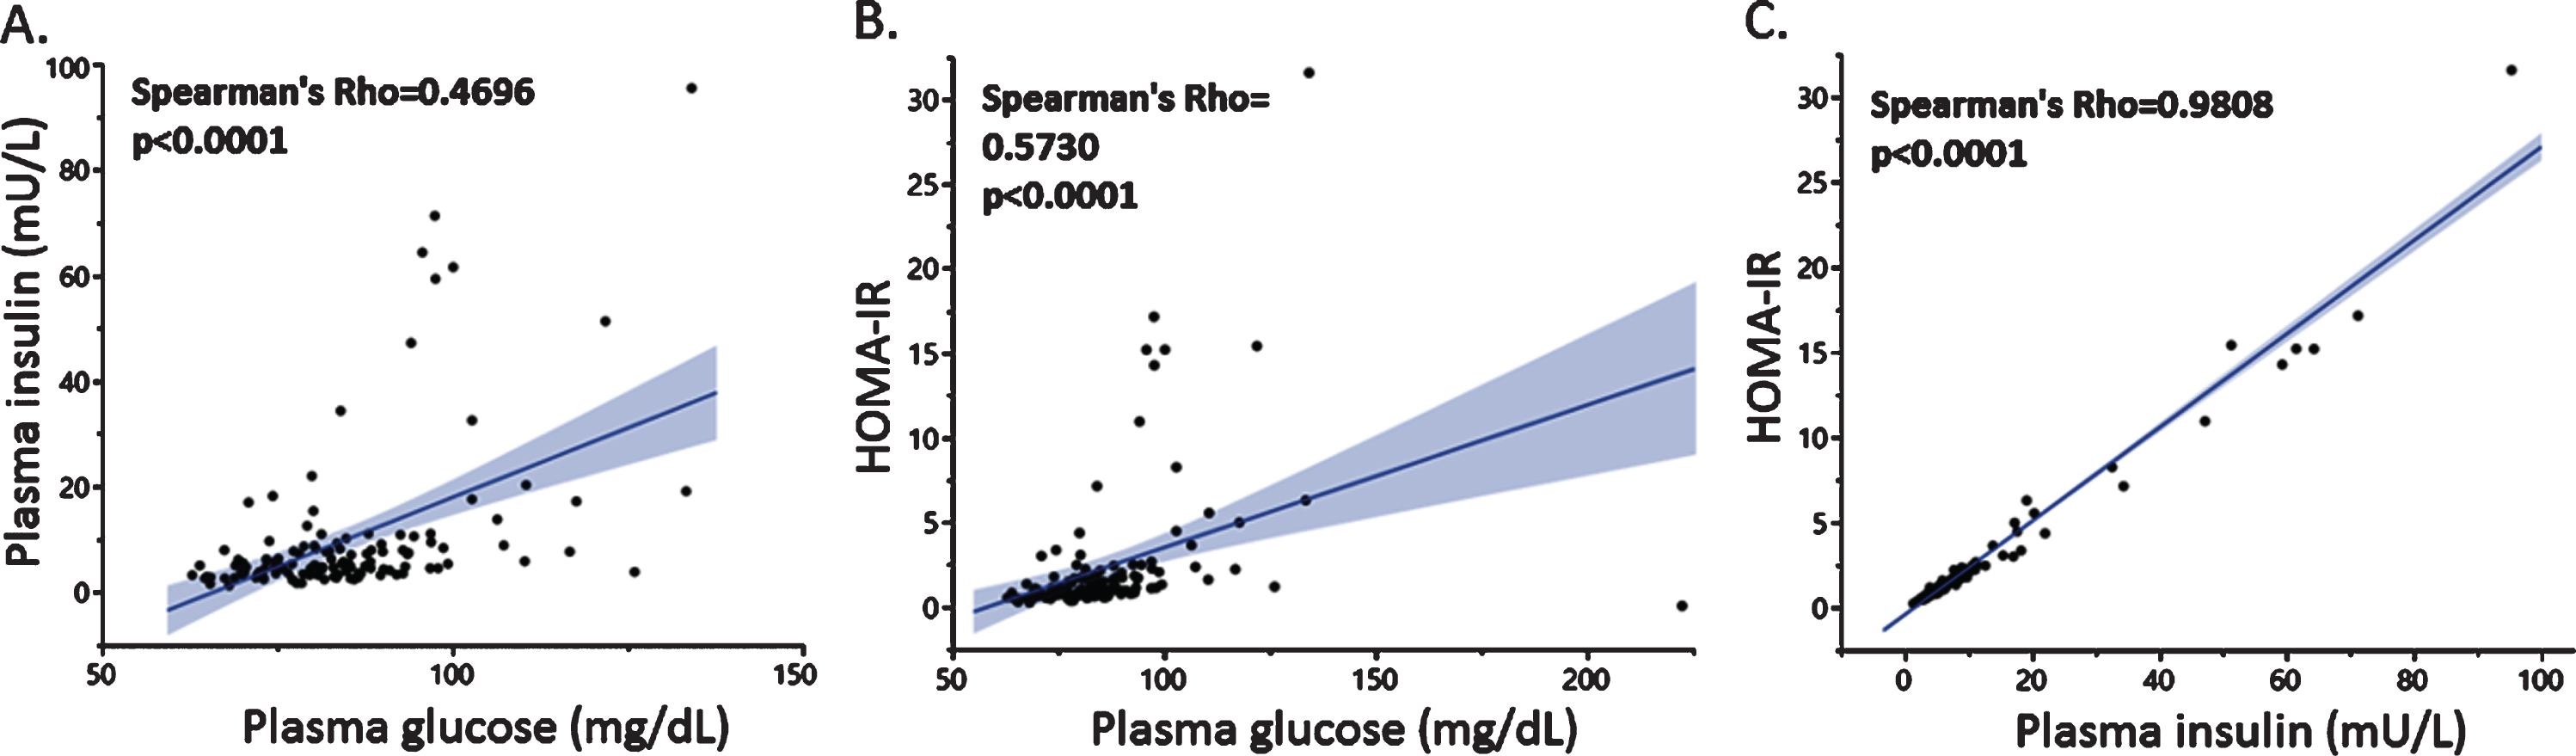 Associations between plasma insulin and glucose levels with HOMA-IR. Plasma glucose levels were positively associated with insulin (A) and HOMA-IR (B), the latter was strongly associated with plasma insulin (C).